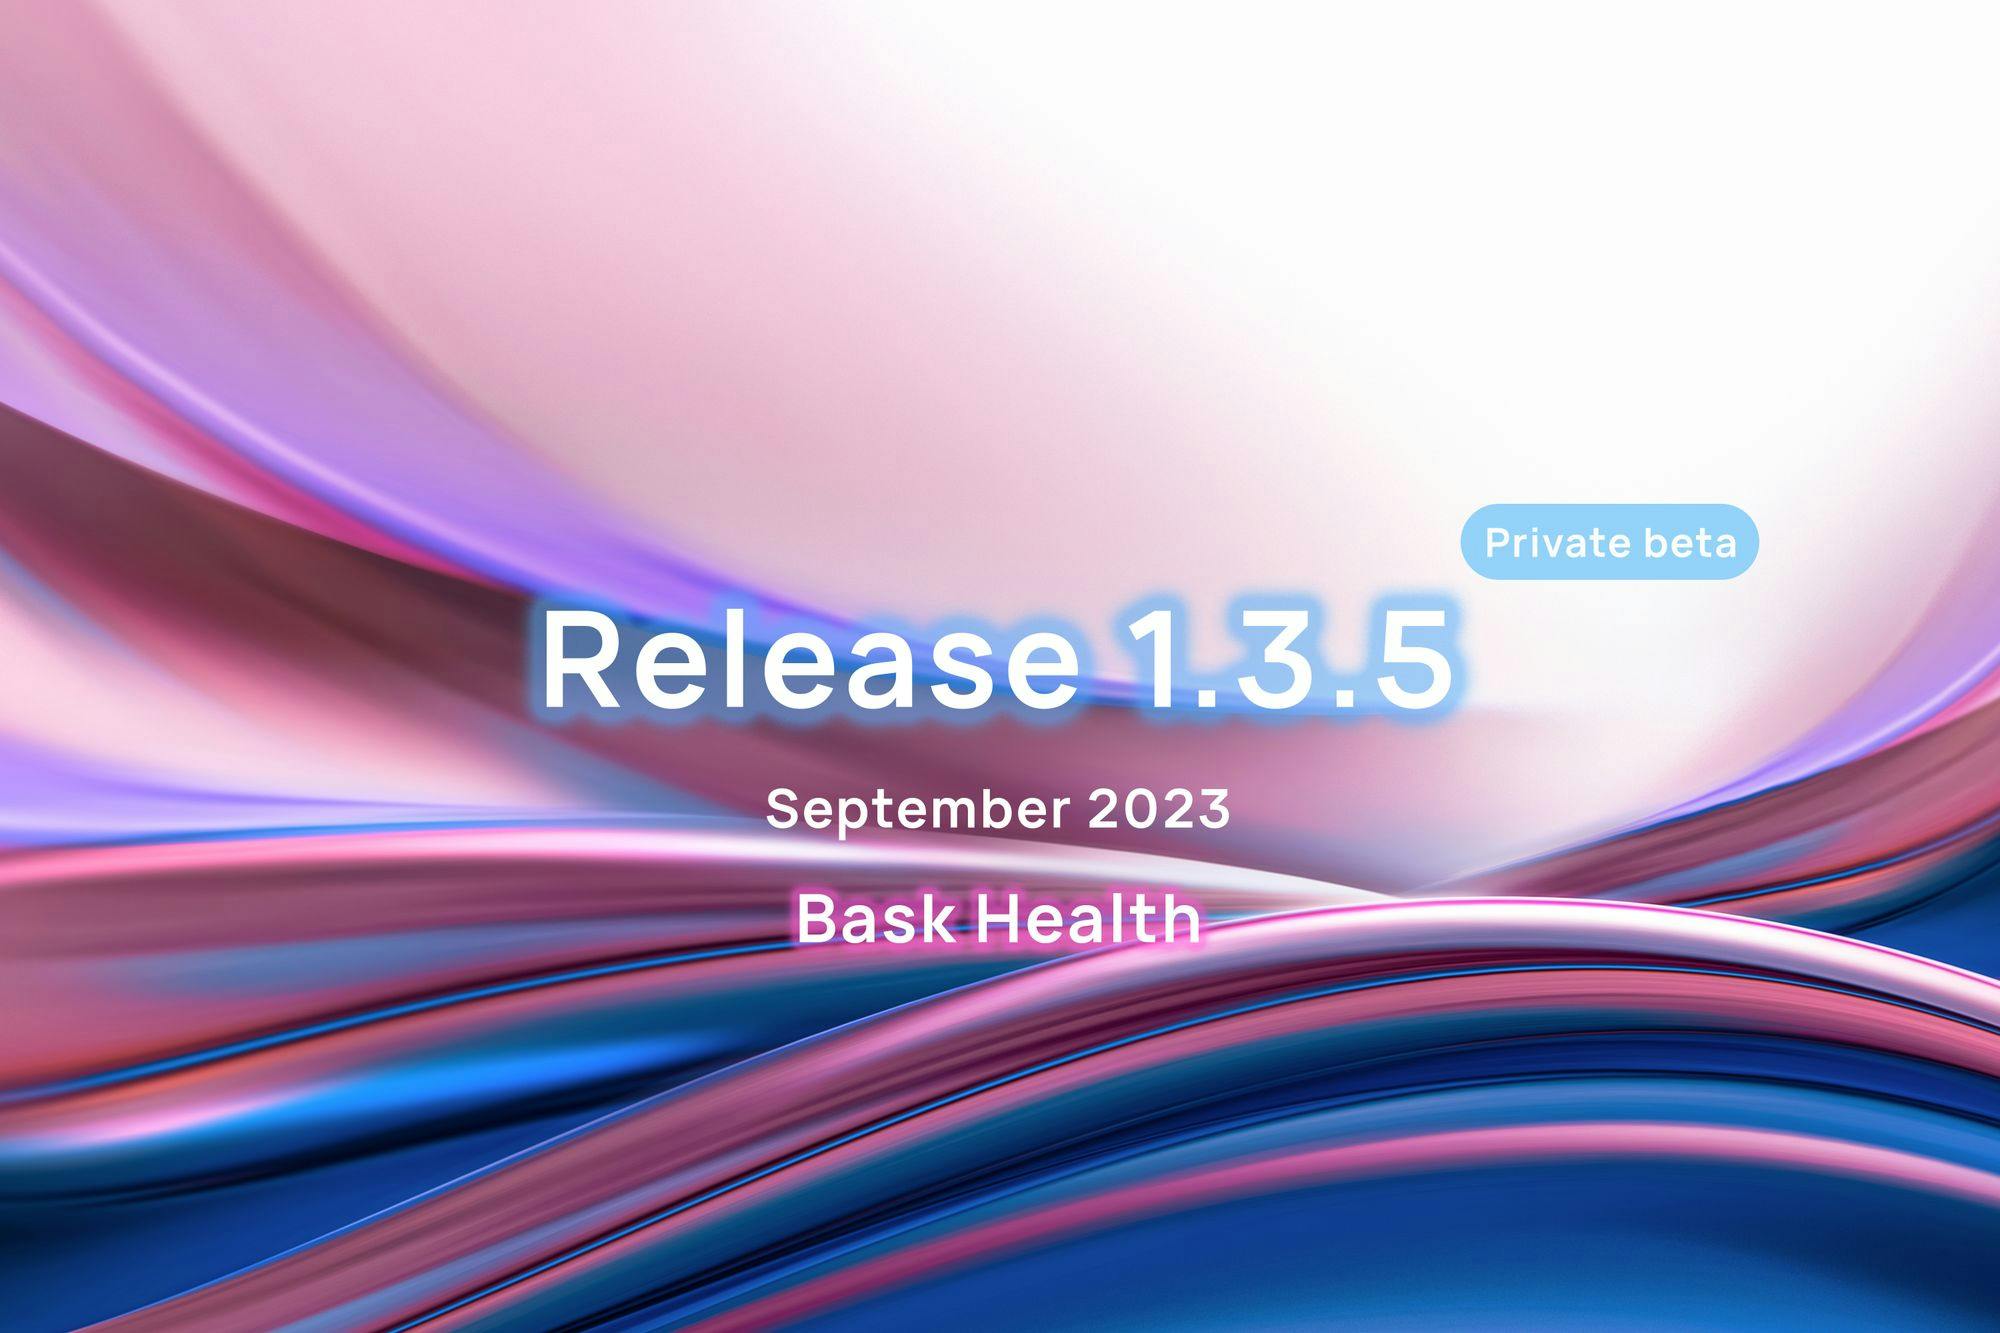 Release 1.3.5